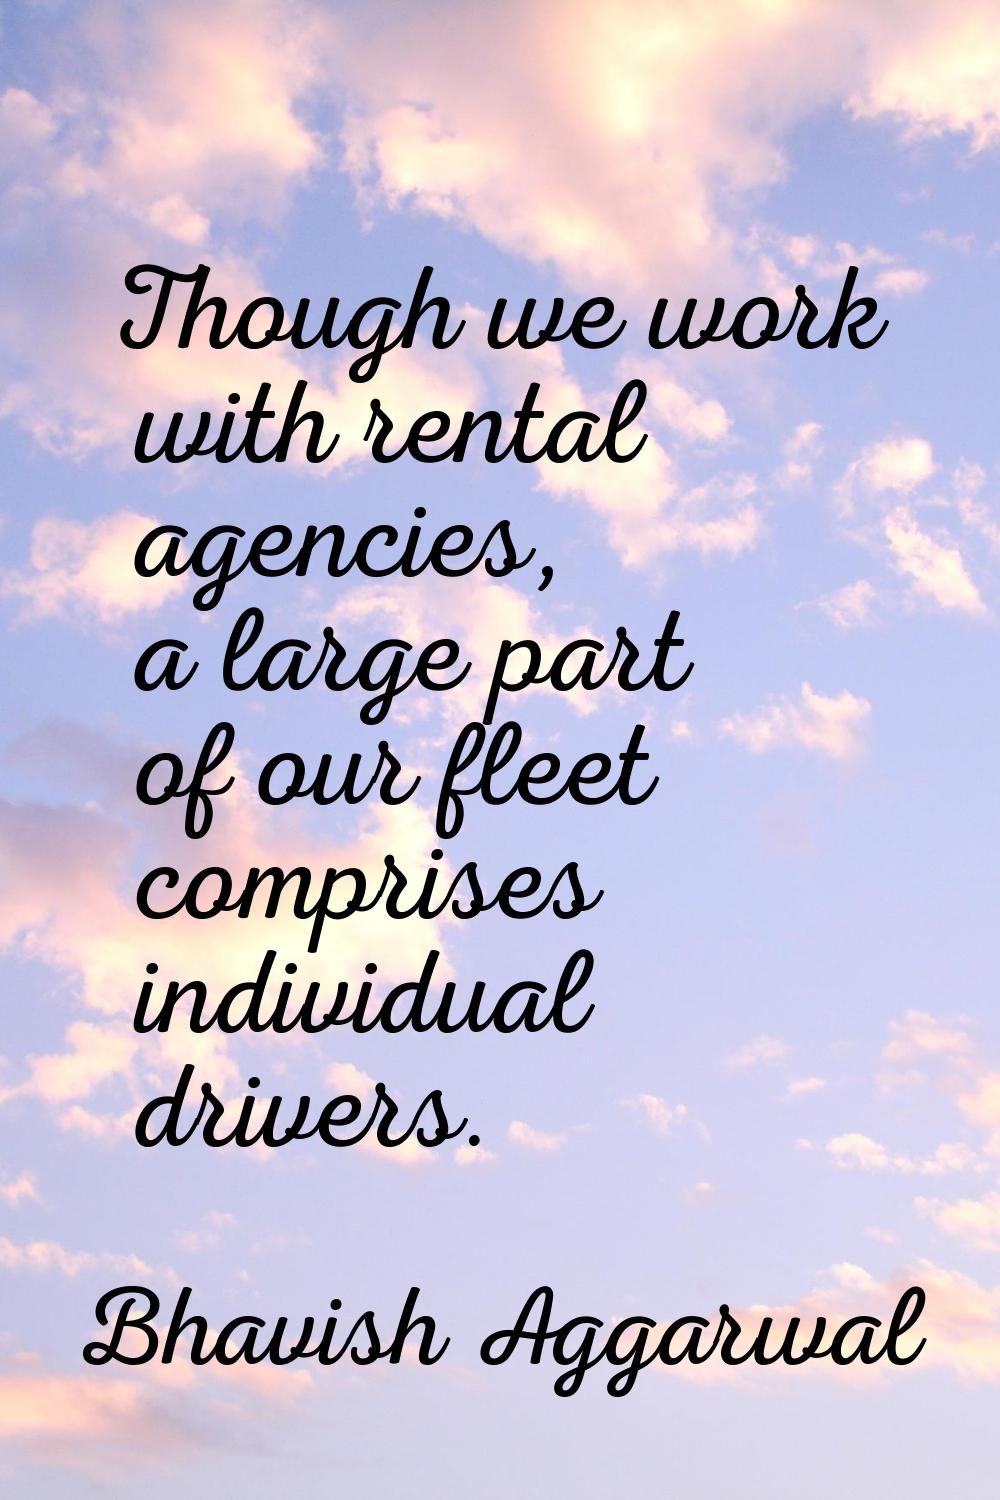 Though we work with rental agencies, a large part of our fleet comprises individual drivers.